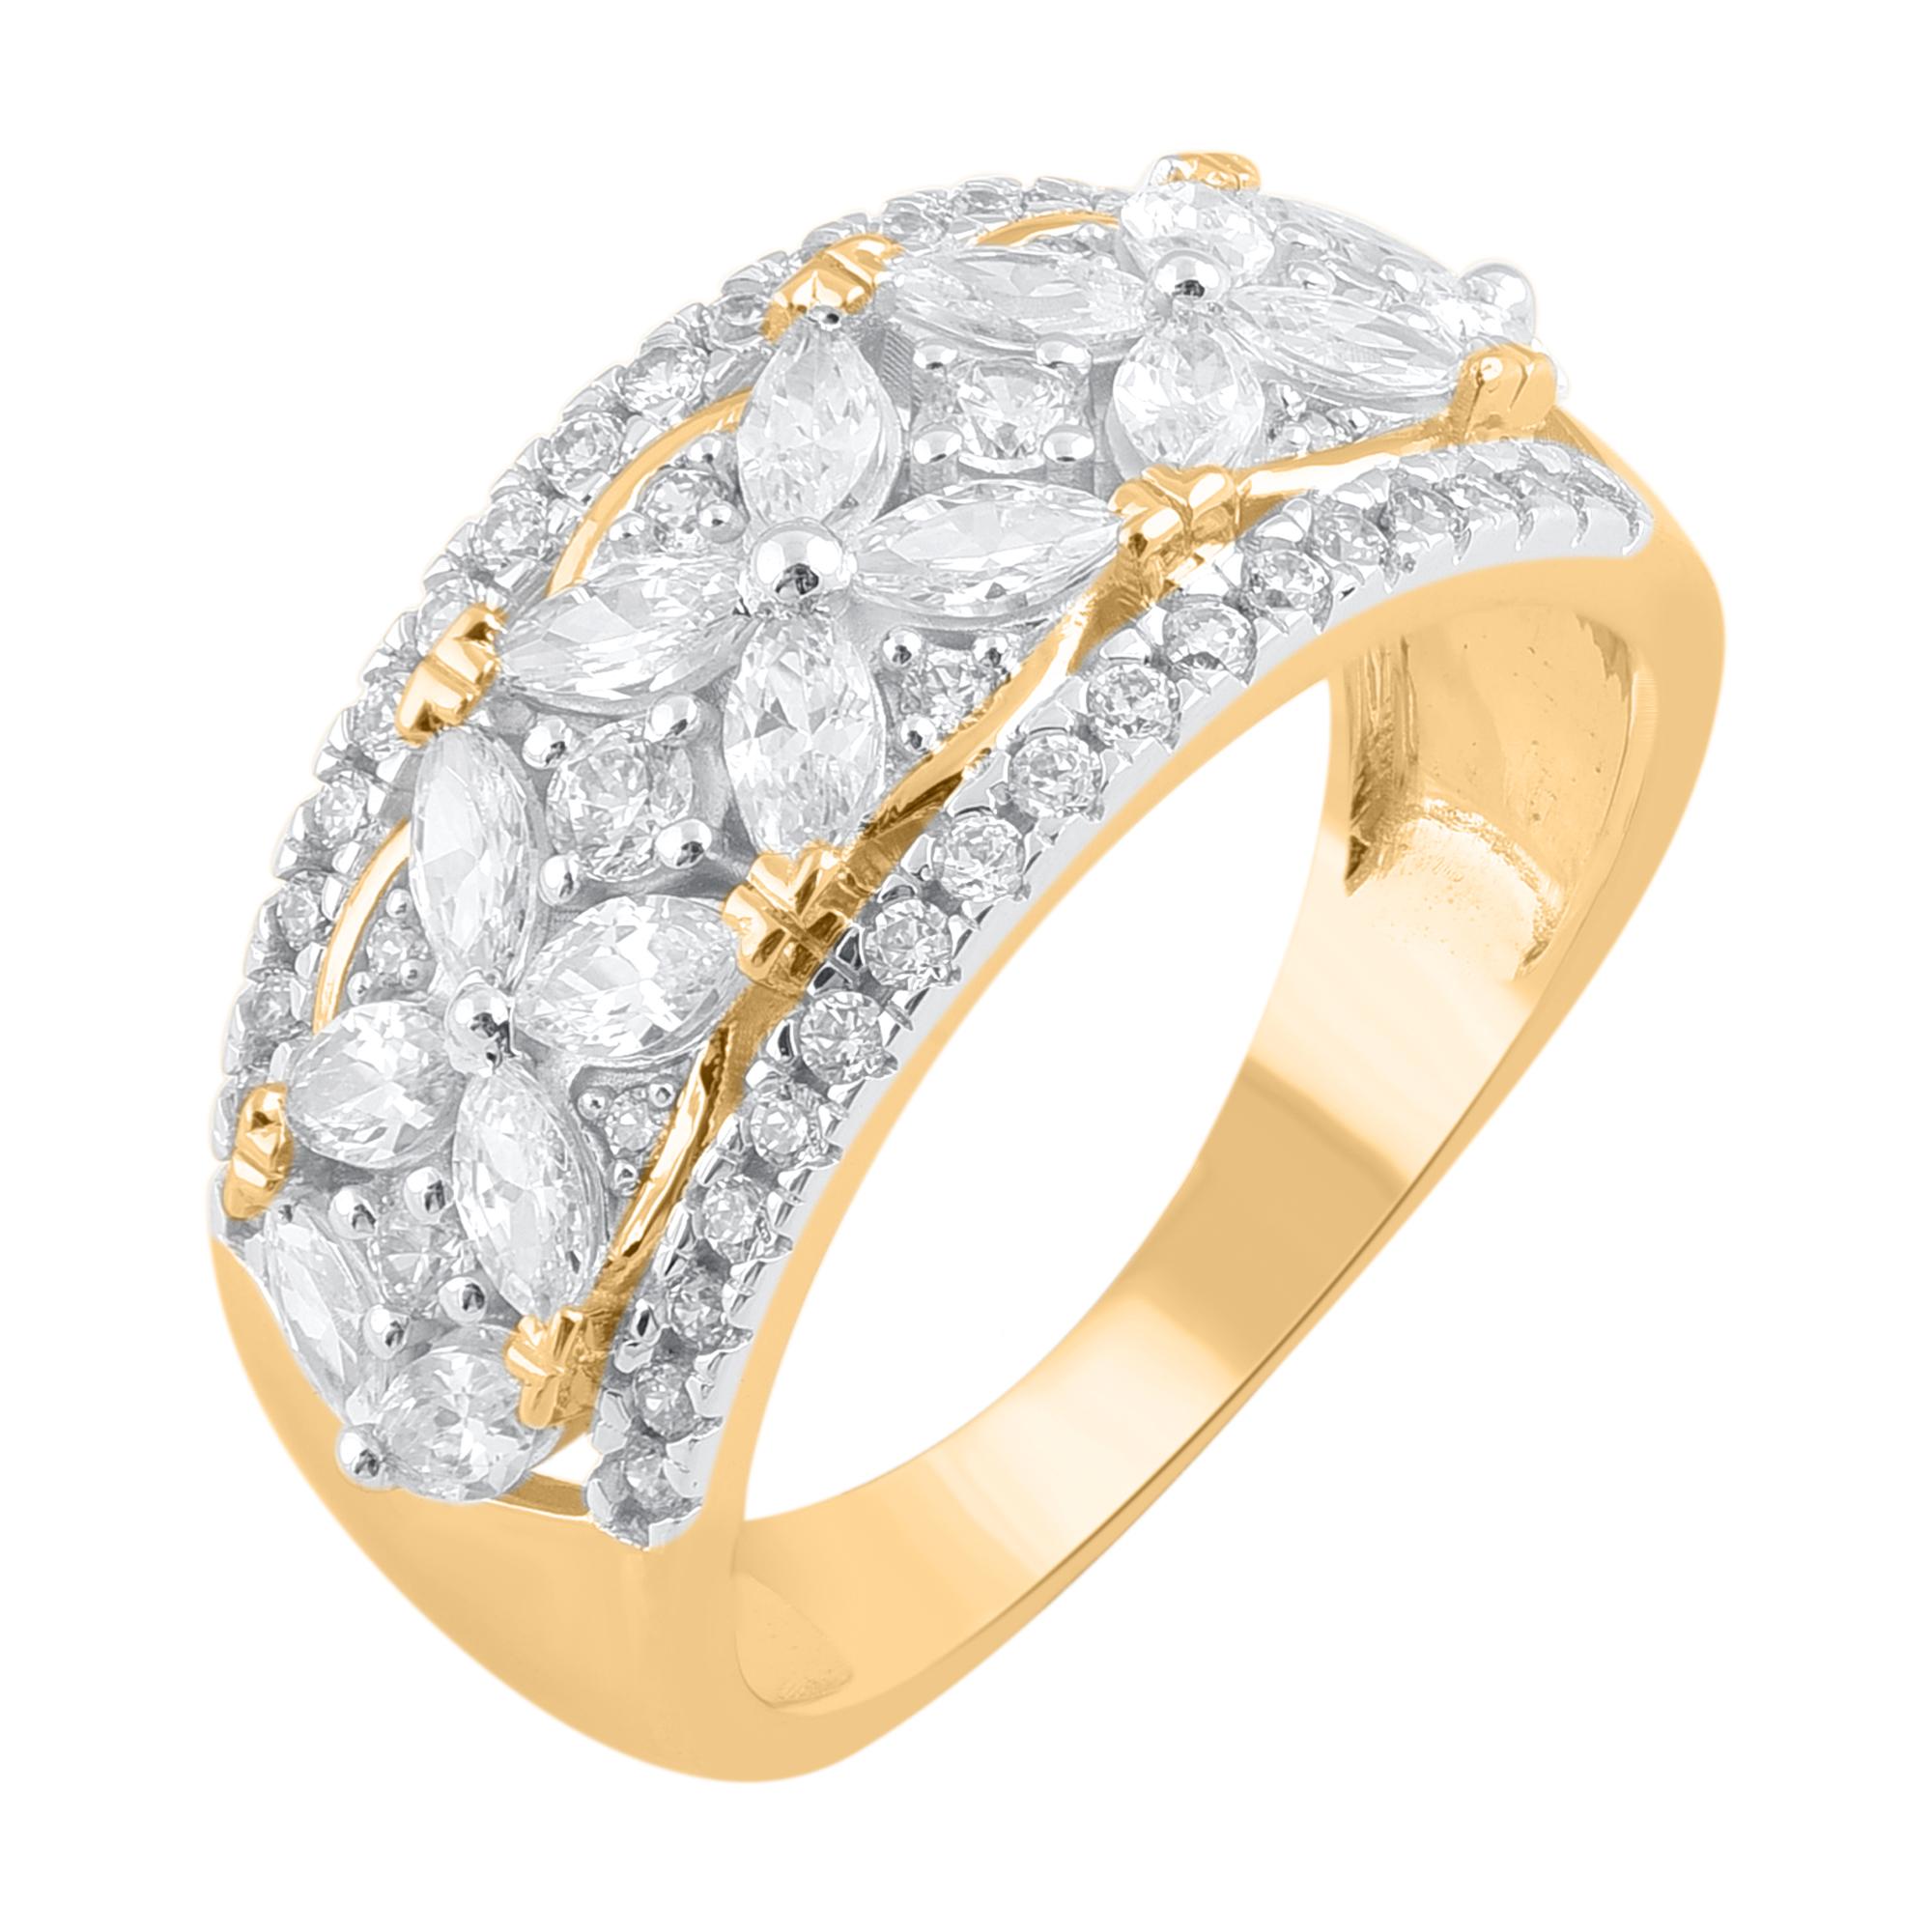 Complete your bridal look with a timeless design. These wedding band rings are studded with 60 brilliant cut, single cut & marquise natural diamonds in prong setting and crafted in 14 Karat yellow gold. The total diamond weight is 1.50 carat. The